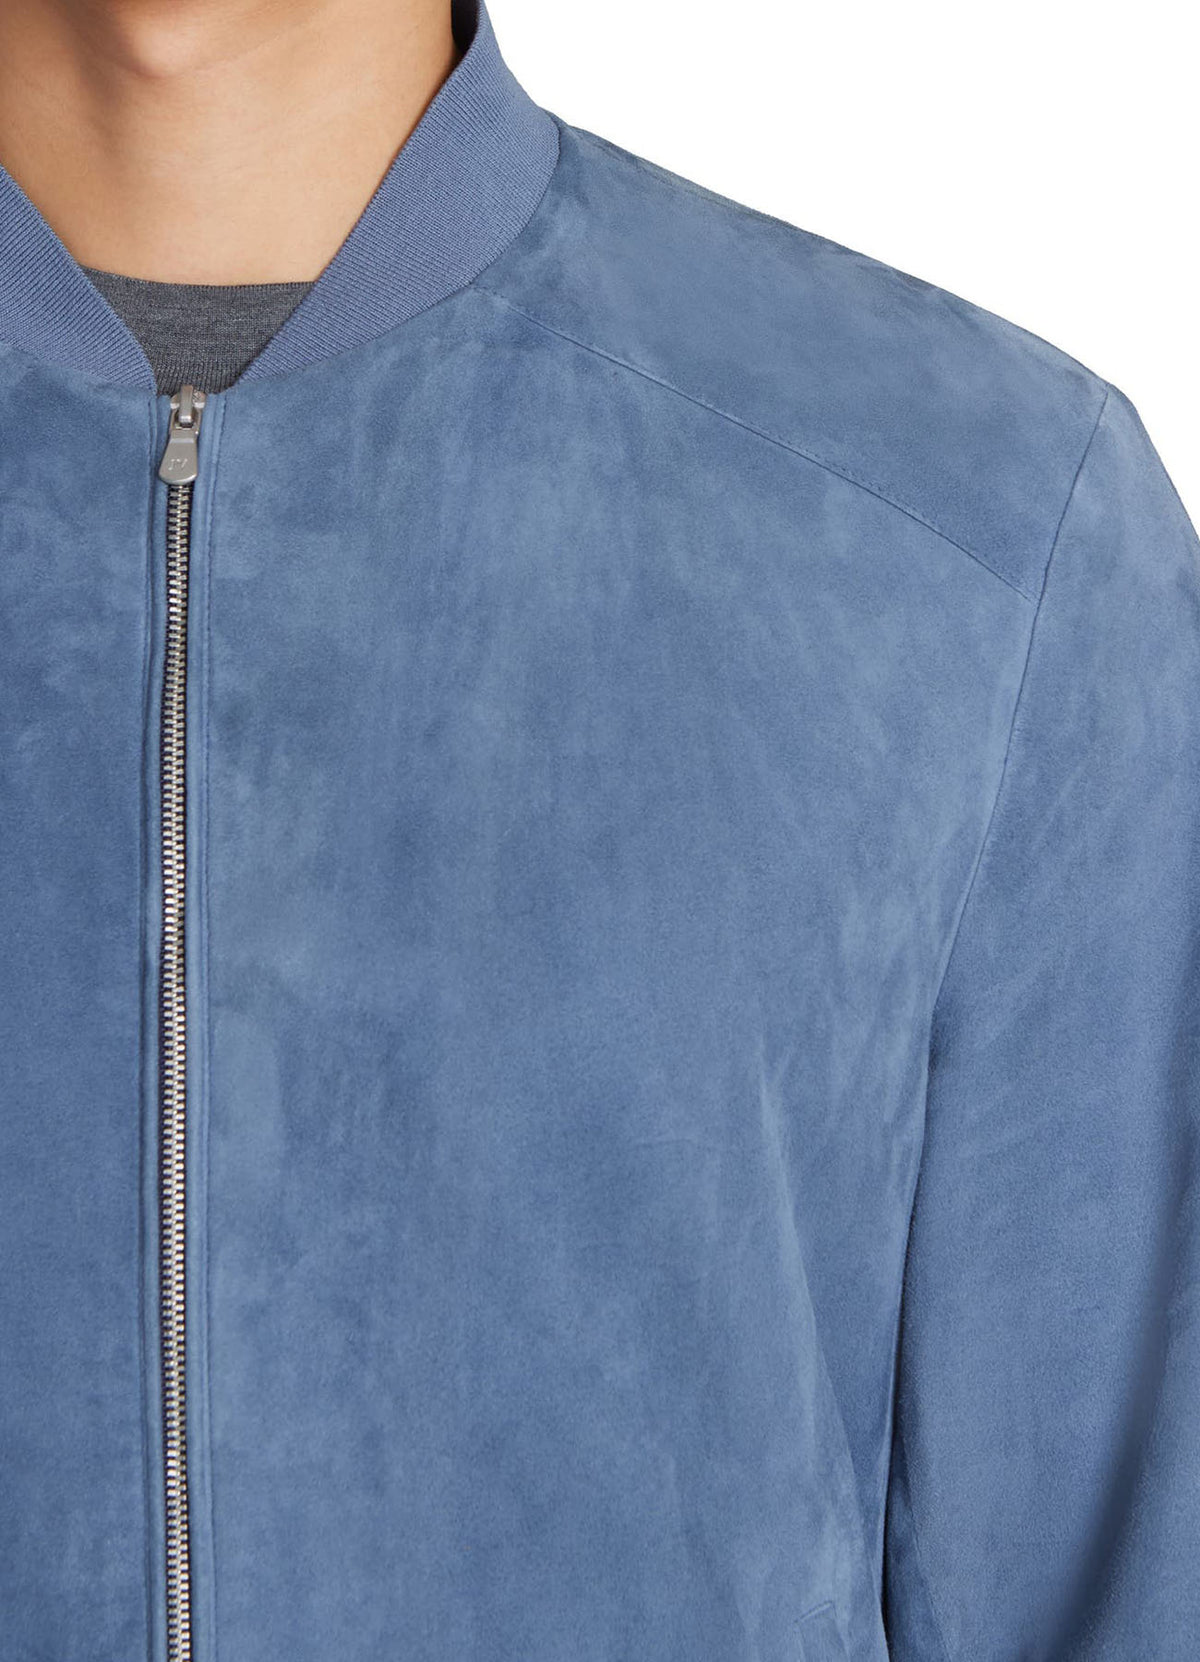 Mens Zenith Blue Bomber Suede Leather Jacket | Shop Now!